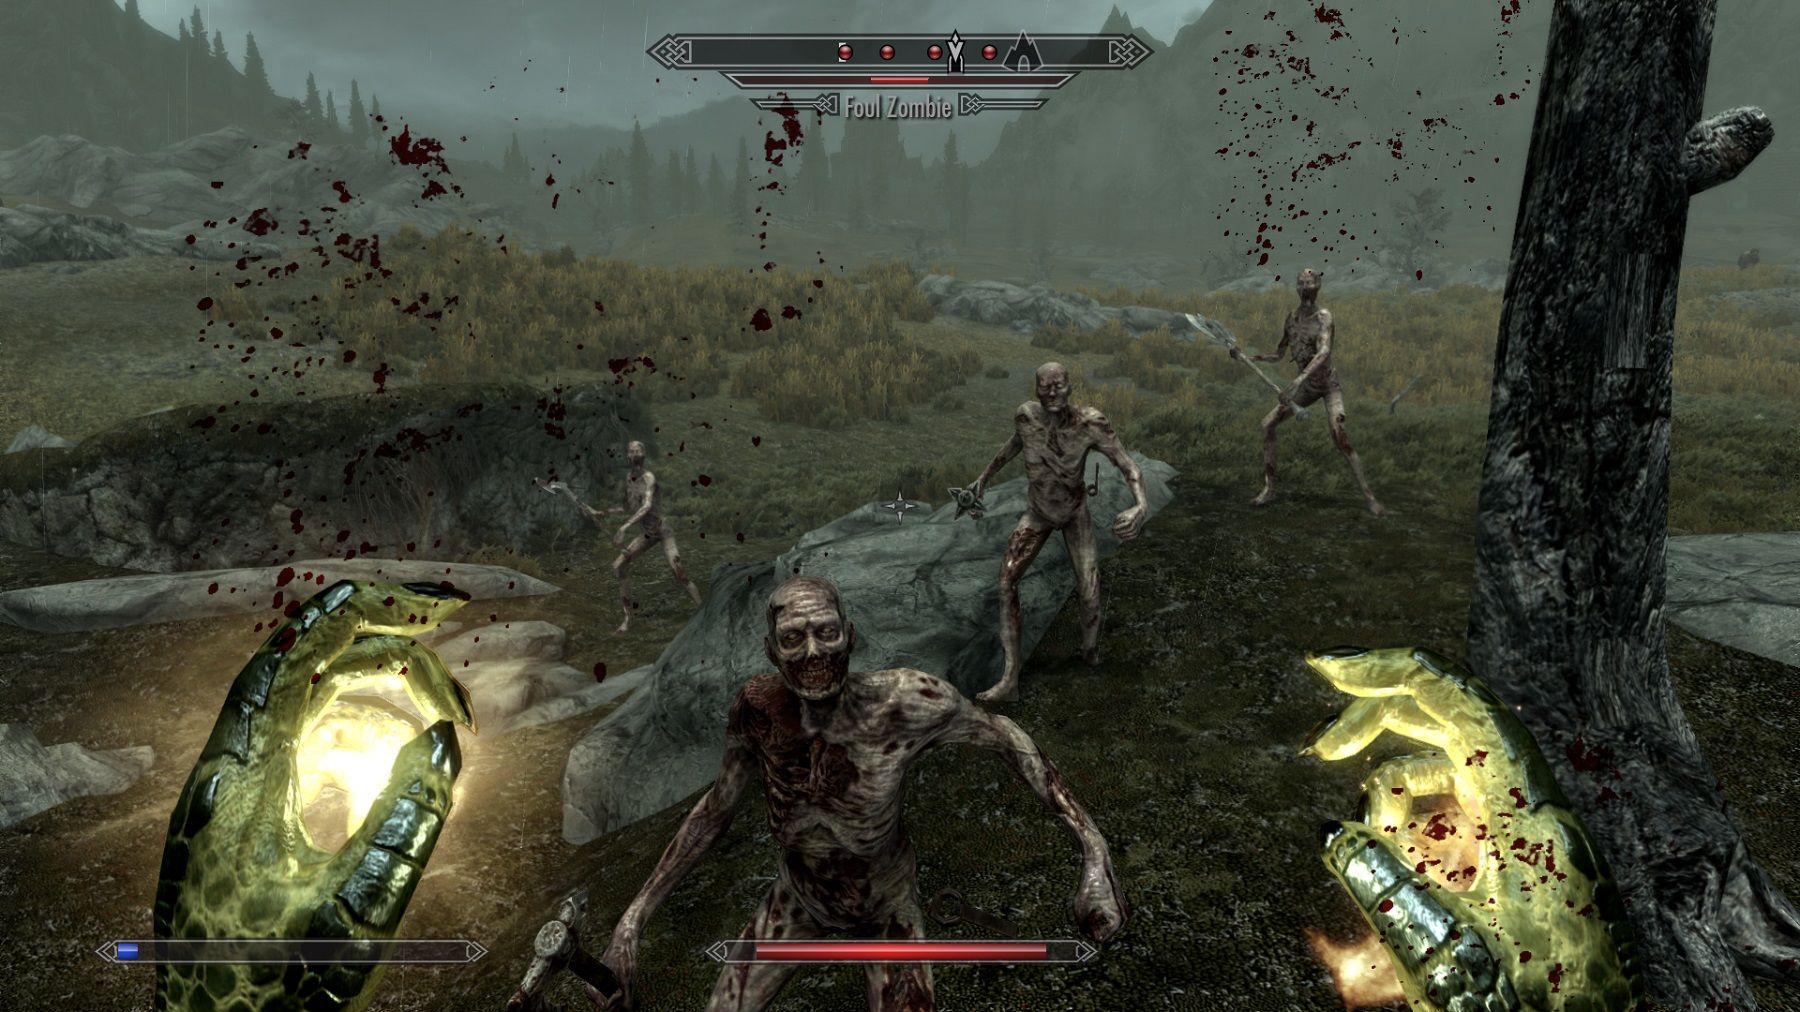 Skyrim Mod Basically Turns the Game Into The Walking Dead